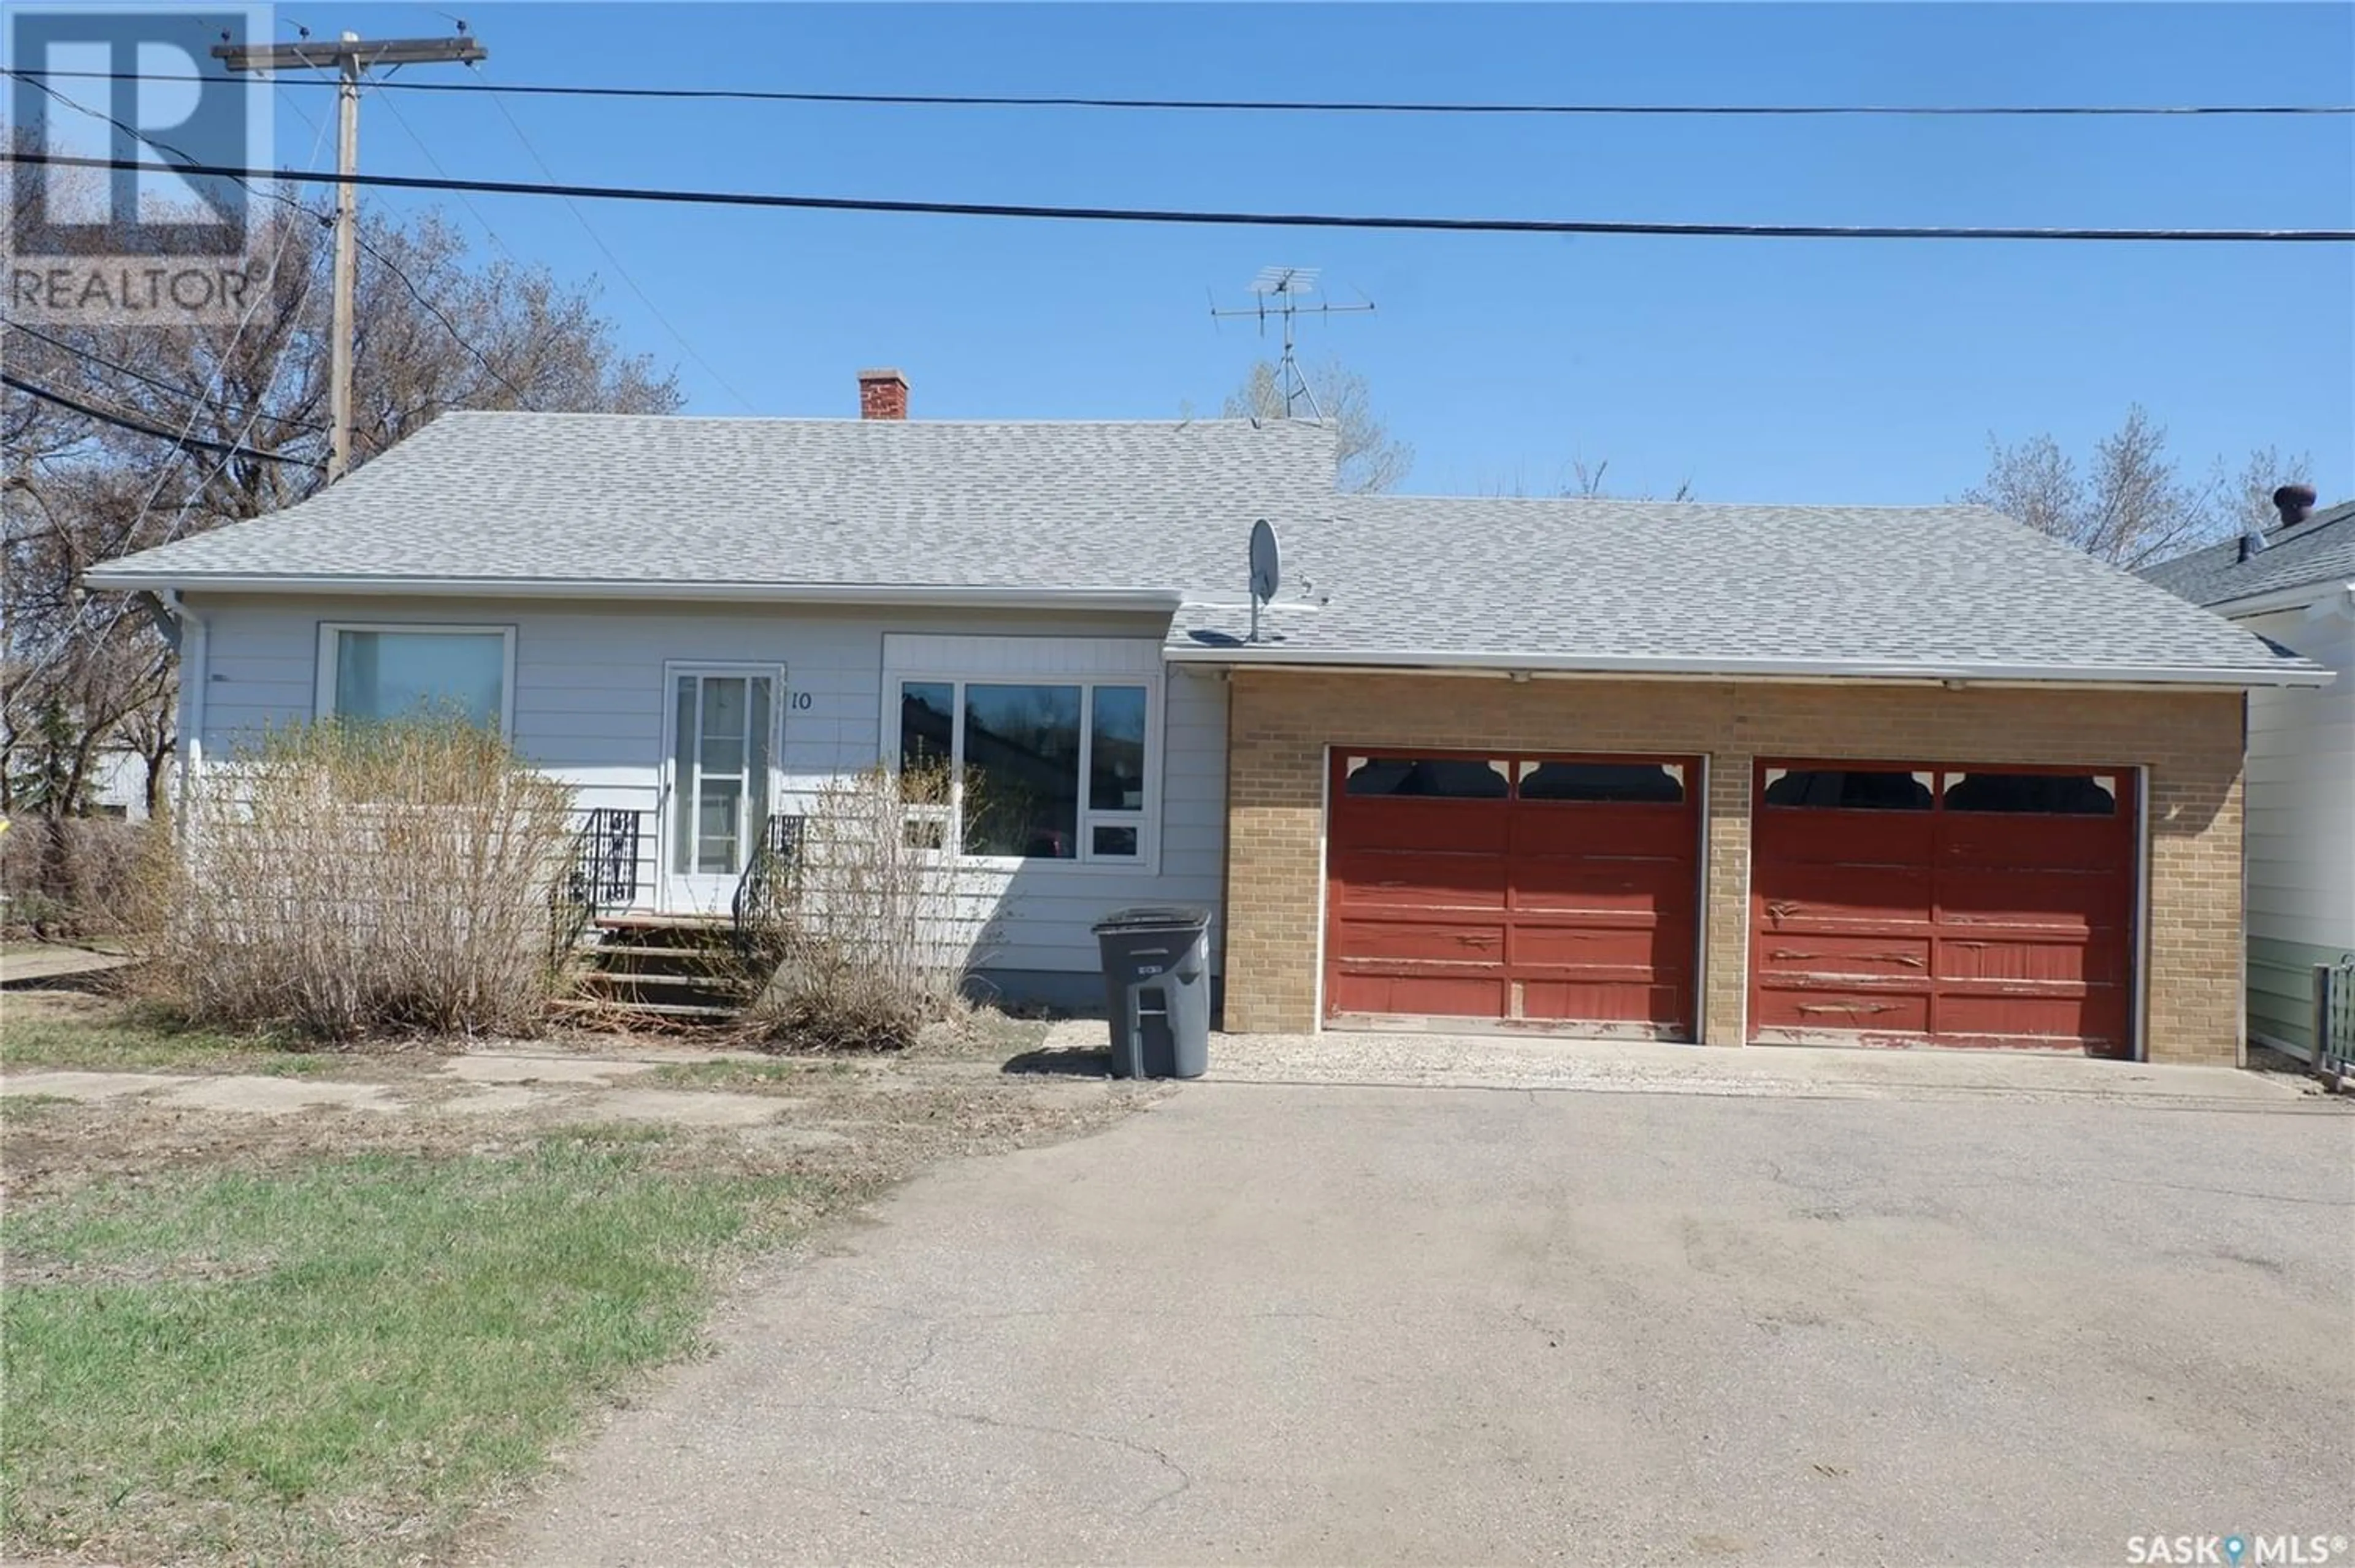 Home with unknown exterior material for 10 D AVENUE, Willow Bunch Saskatchewan S0H4K0